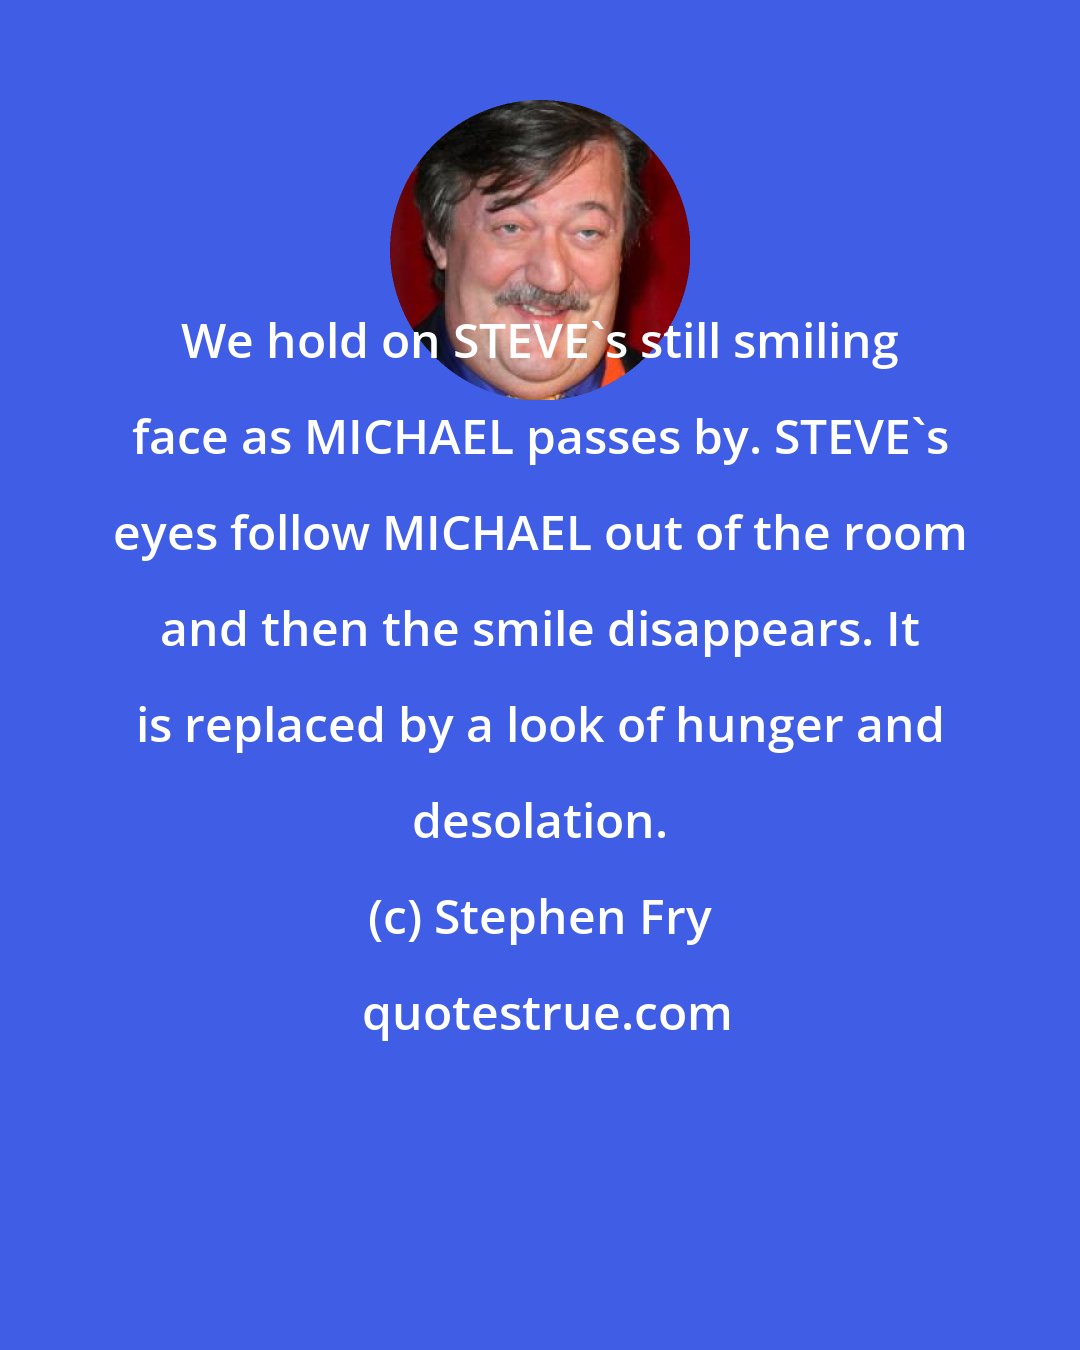 Stephen Fry: We hold on STEVE's still smiling face as MICHAEL passes by. STEVE's eyes follow MICHAEL out of the room and then the smile disappears. It is replaced by a look of hunger and desolation.